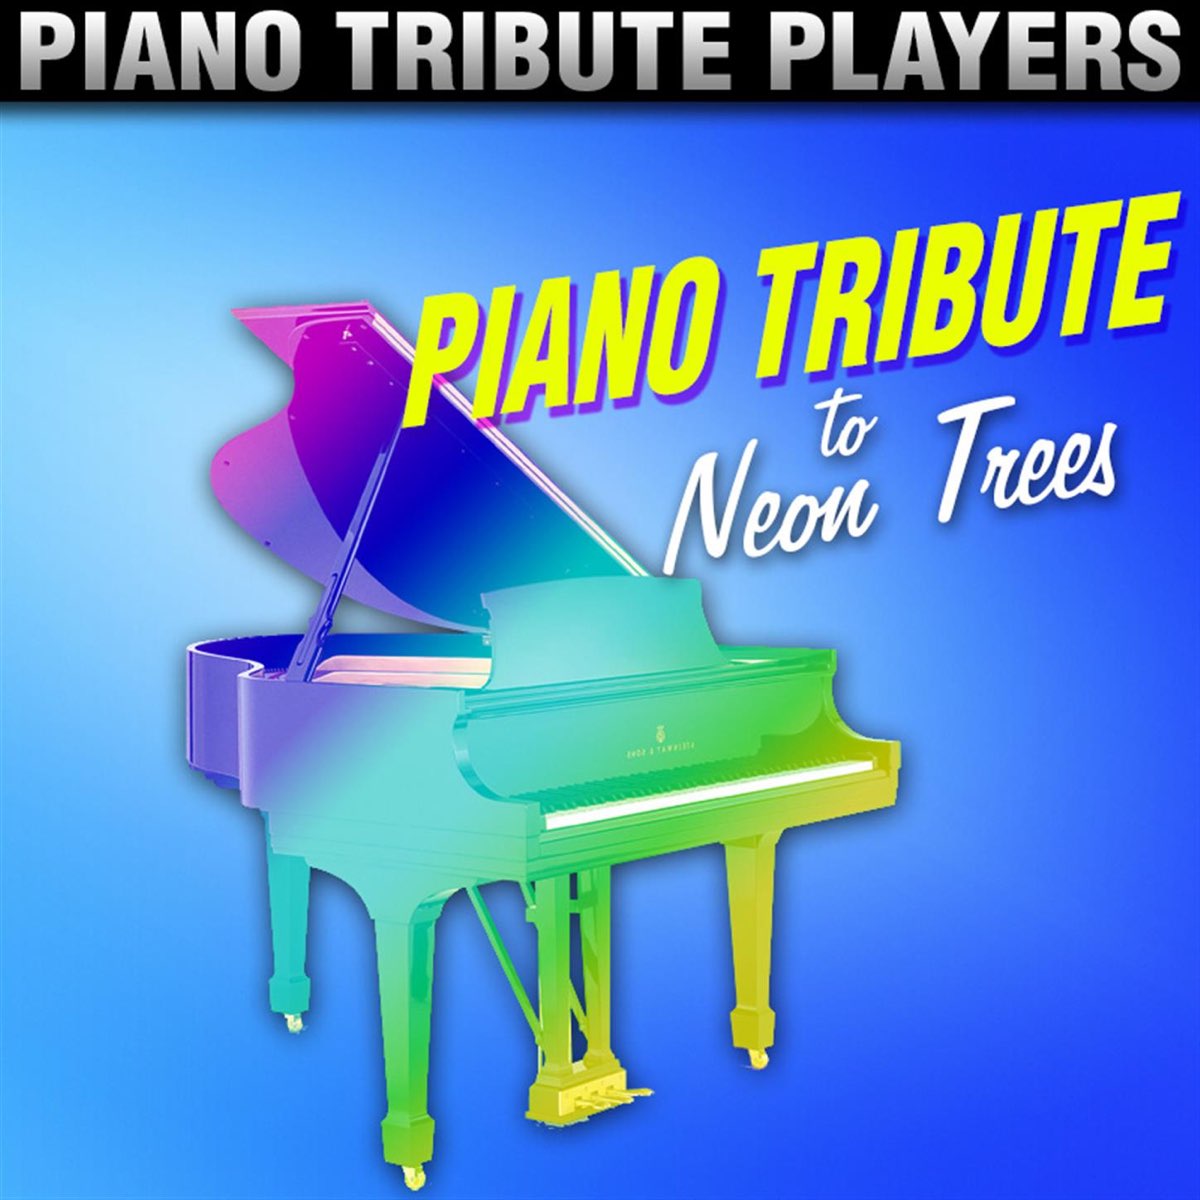 Piano Tribute Players. Piano Tribute Players музыканты. Piano Tribute to Queen. Piano Tribute to Kiss.